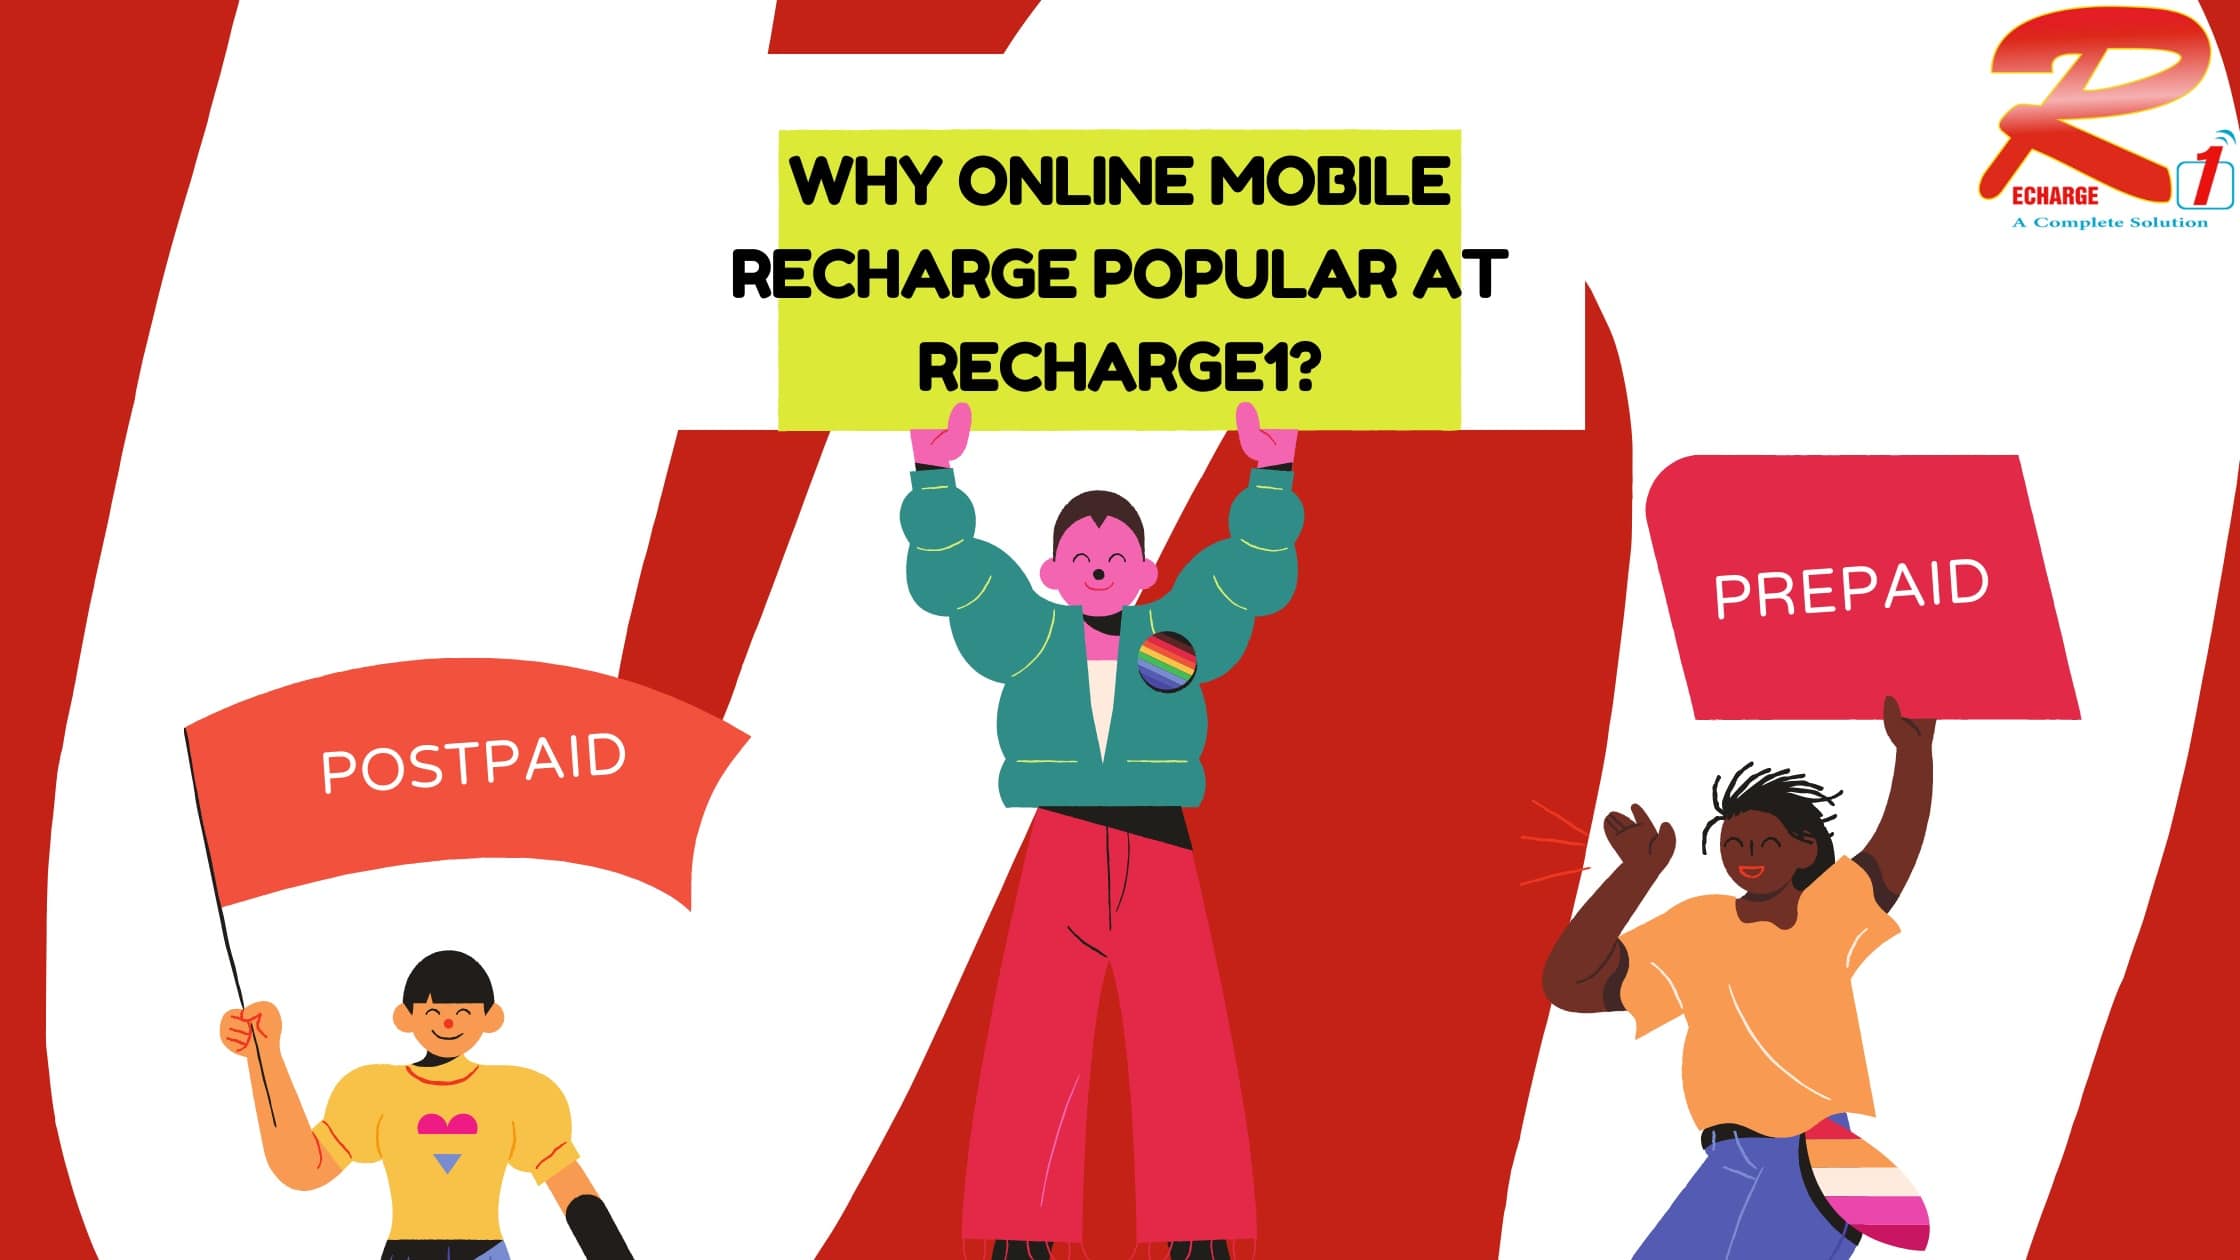  Why Online Mobile Recharge Is Popular At Recharge1?